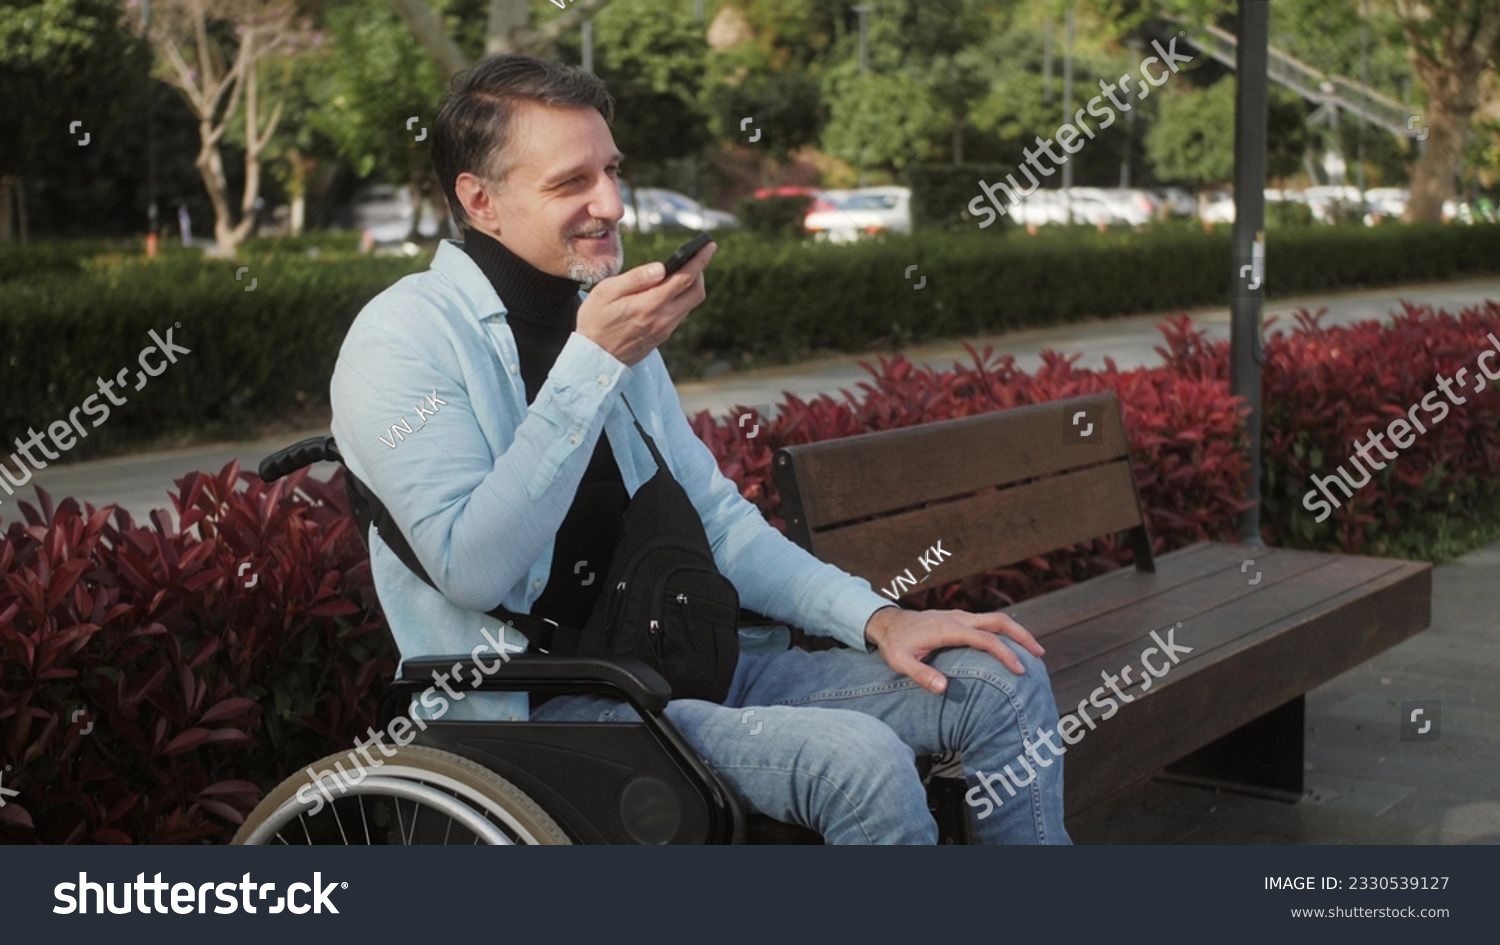 Positive disabled man Middle eastern man dictation voice message and sending using mobile phone. Disability and lifestyle concept. #2330539127